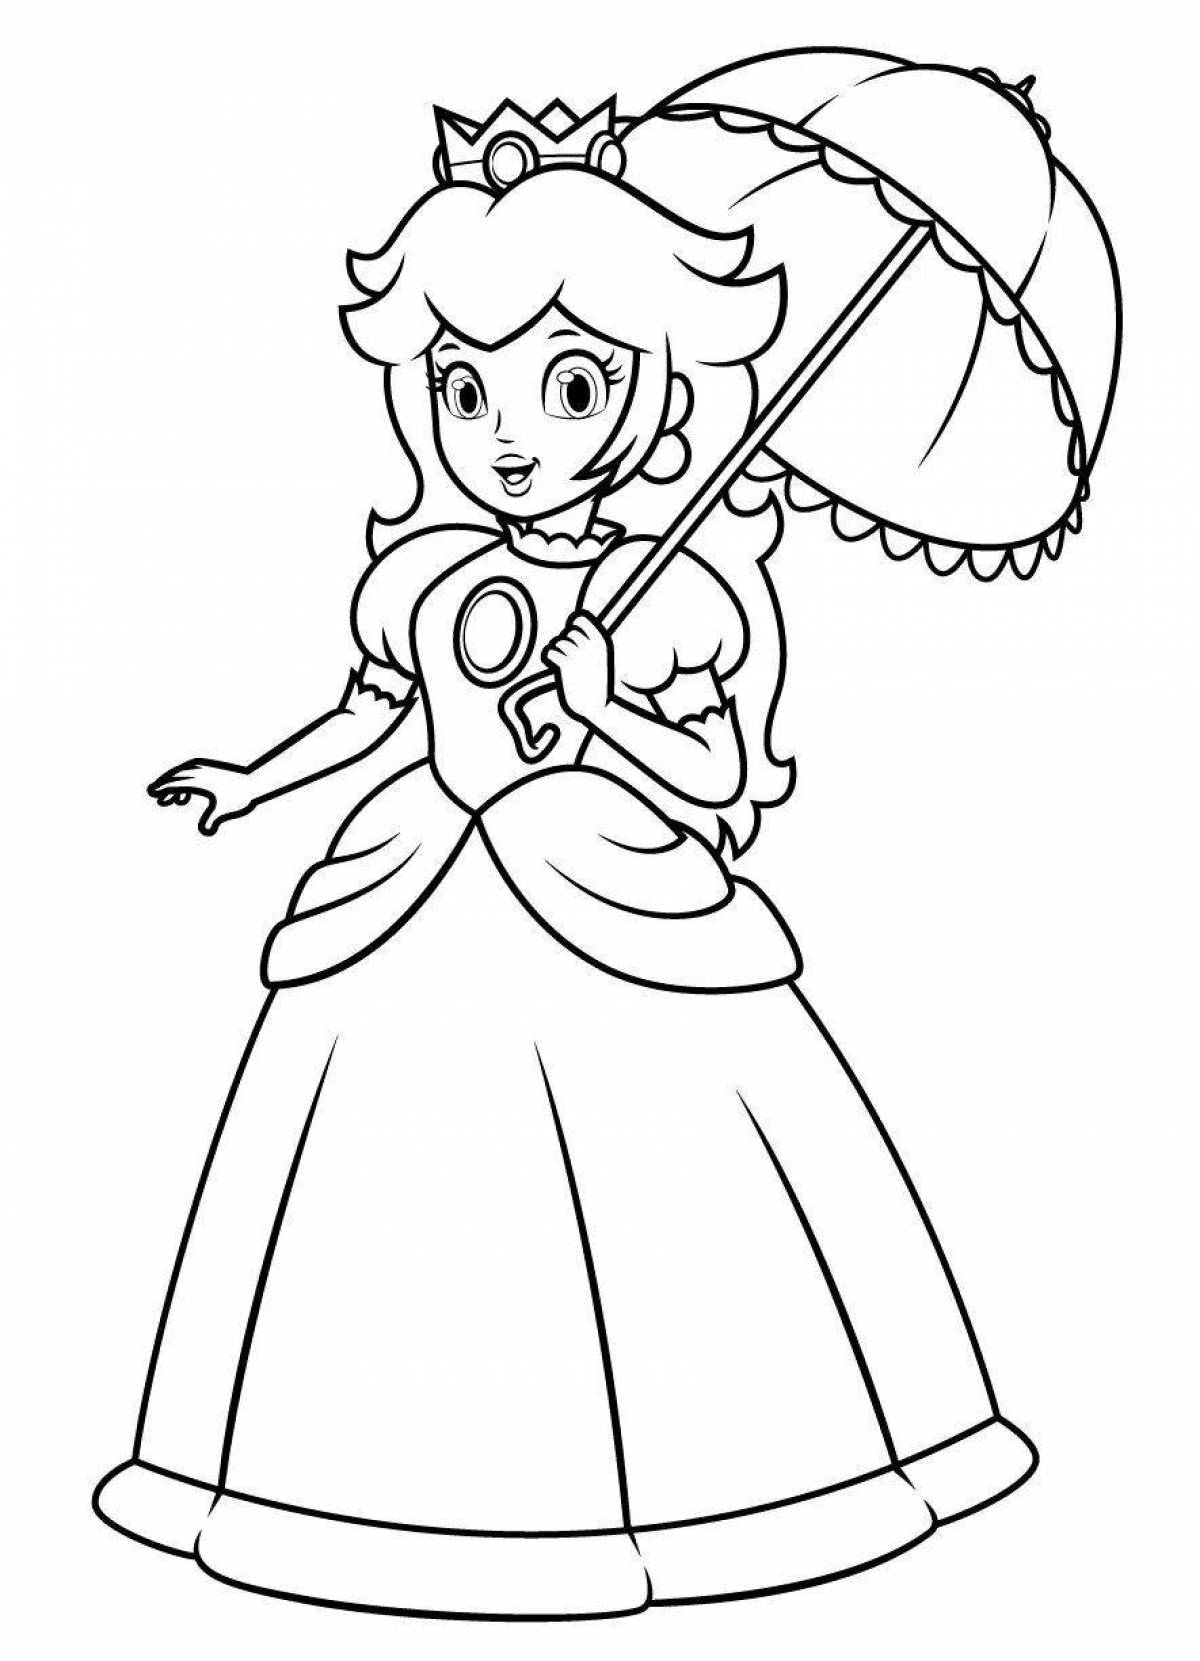 Animated peach coloring